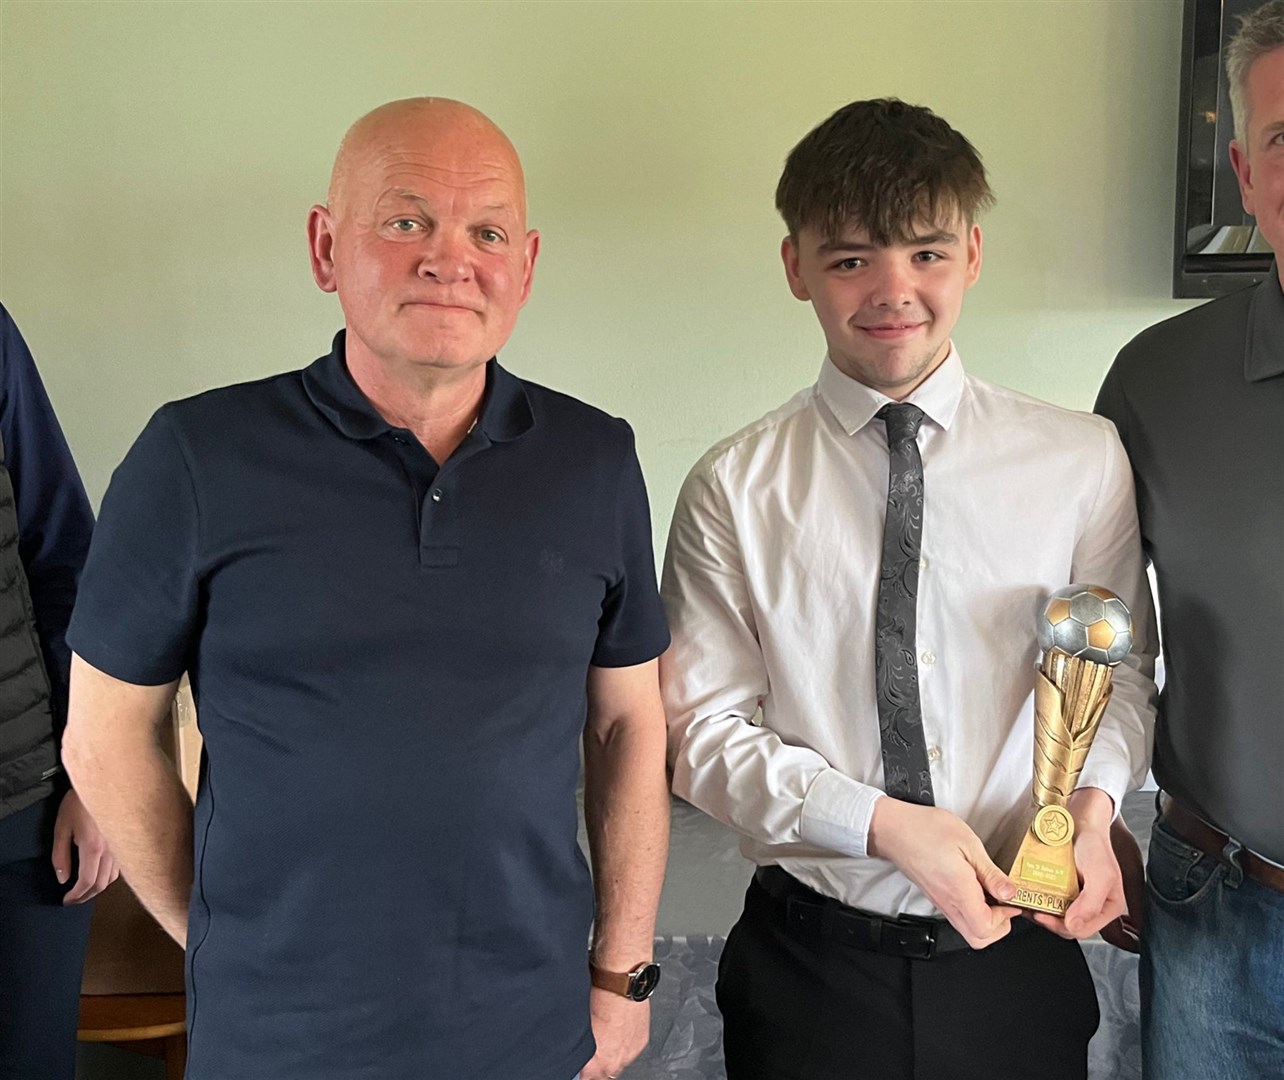 The award for Parents' Player of the Year, presented by Neil Mackenzie, went to Billy Crombie.